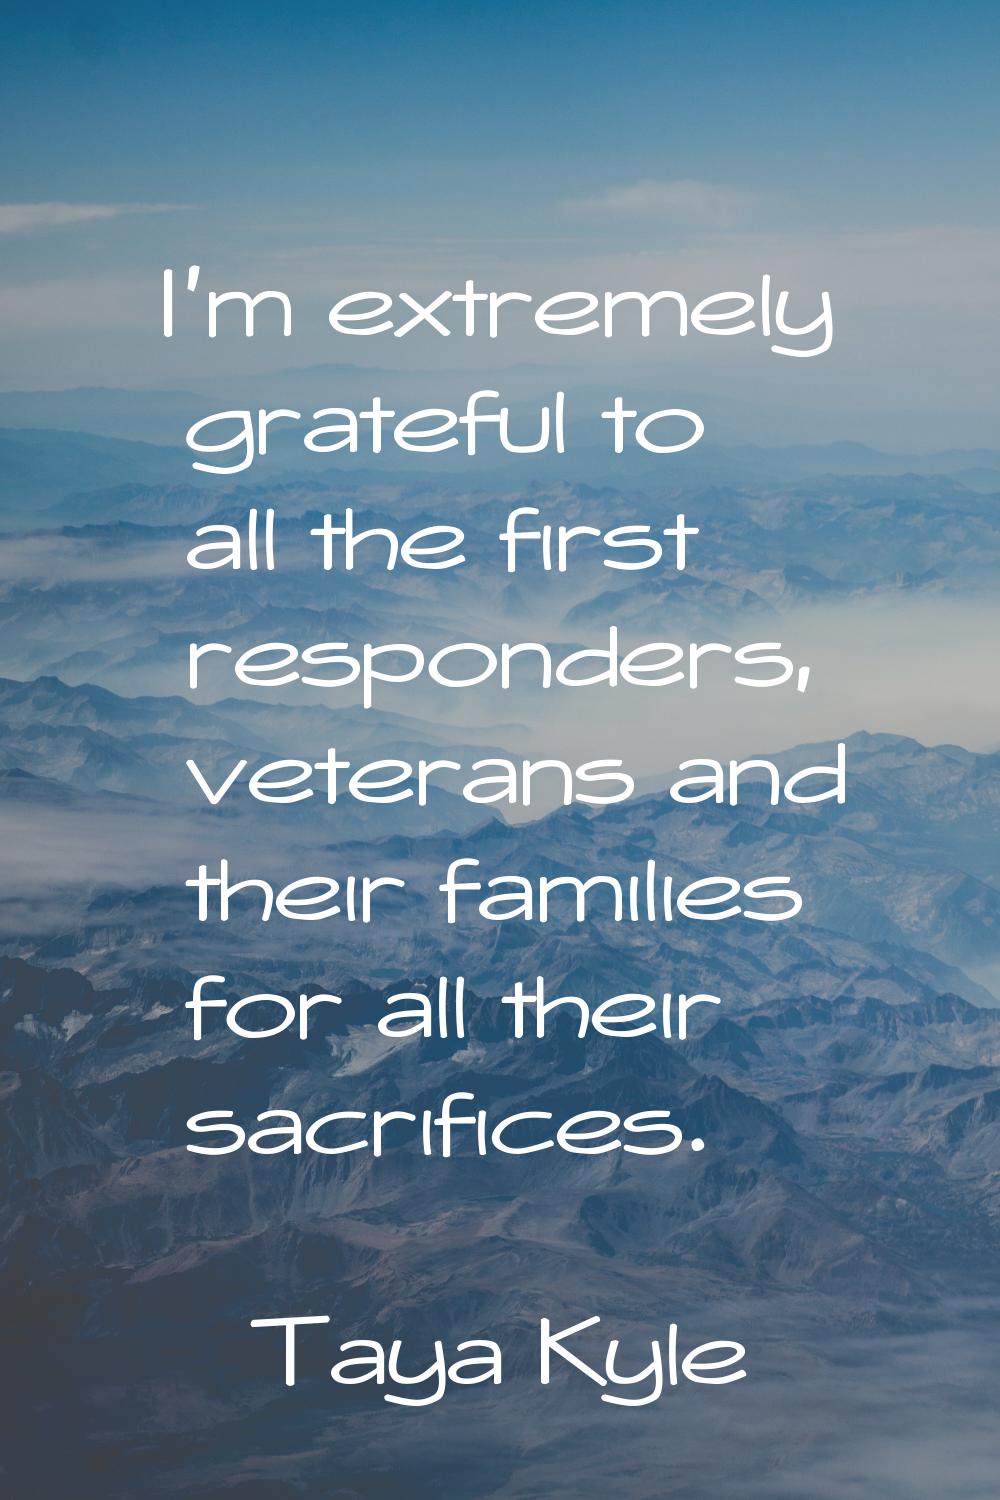 I'm extremely grateful to all the first responders, veterans and their families for all their sacri